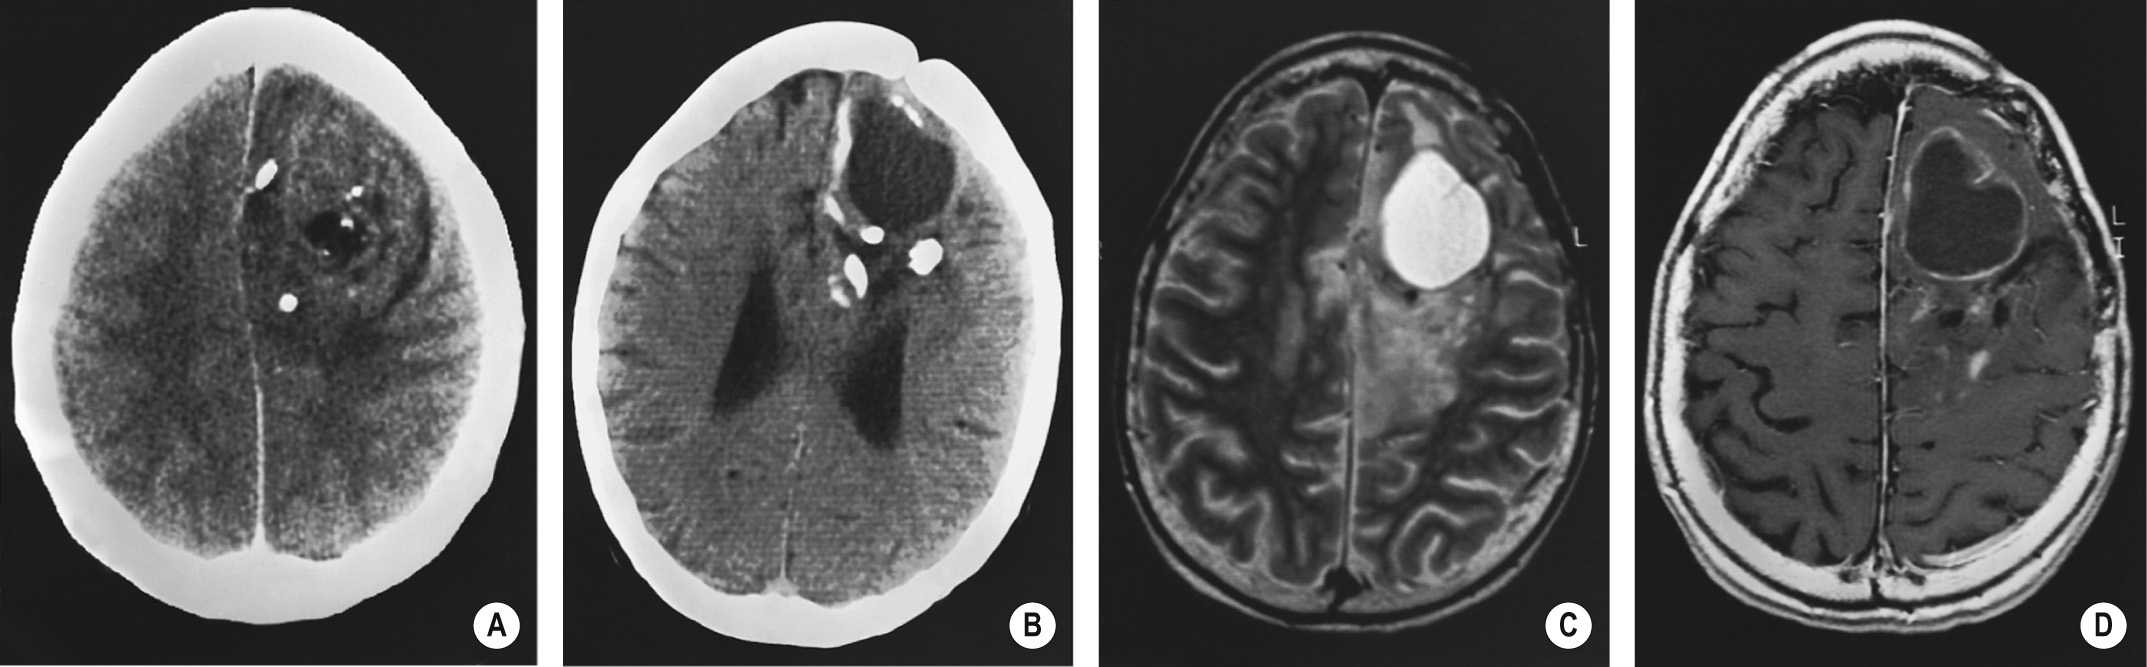 Oligodendroglioma. CECT (A) shows a large left frontal tumour that involves the cortex. It is predominantly solid with irregular enhancement, but there are also cysts and coarse calcification. Follow-up after 2 years with CT (B), T2WI (C) and T1WI + Gad (D) shows more extensive cyst formation and calcification (C). Note the left frontal craniotomy. *